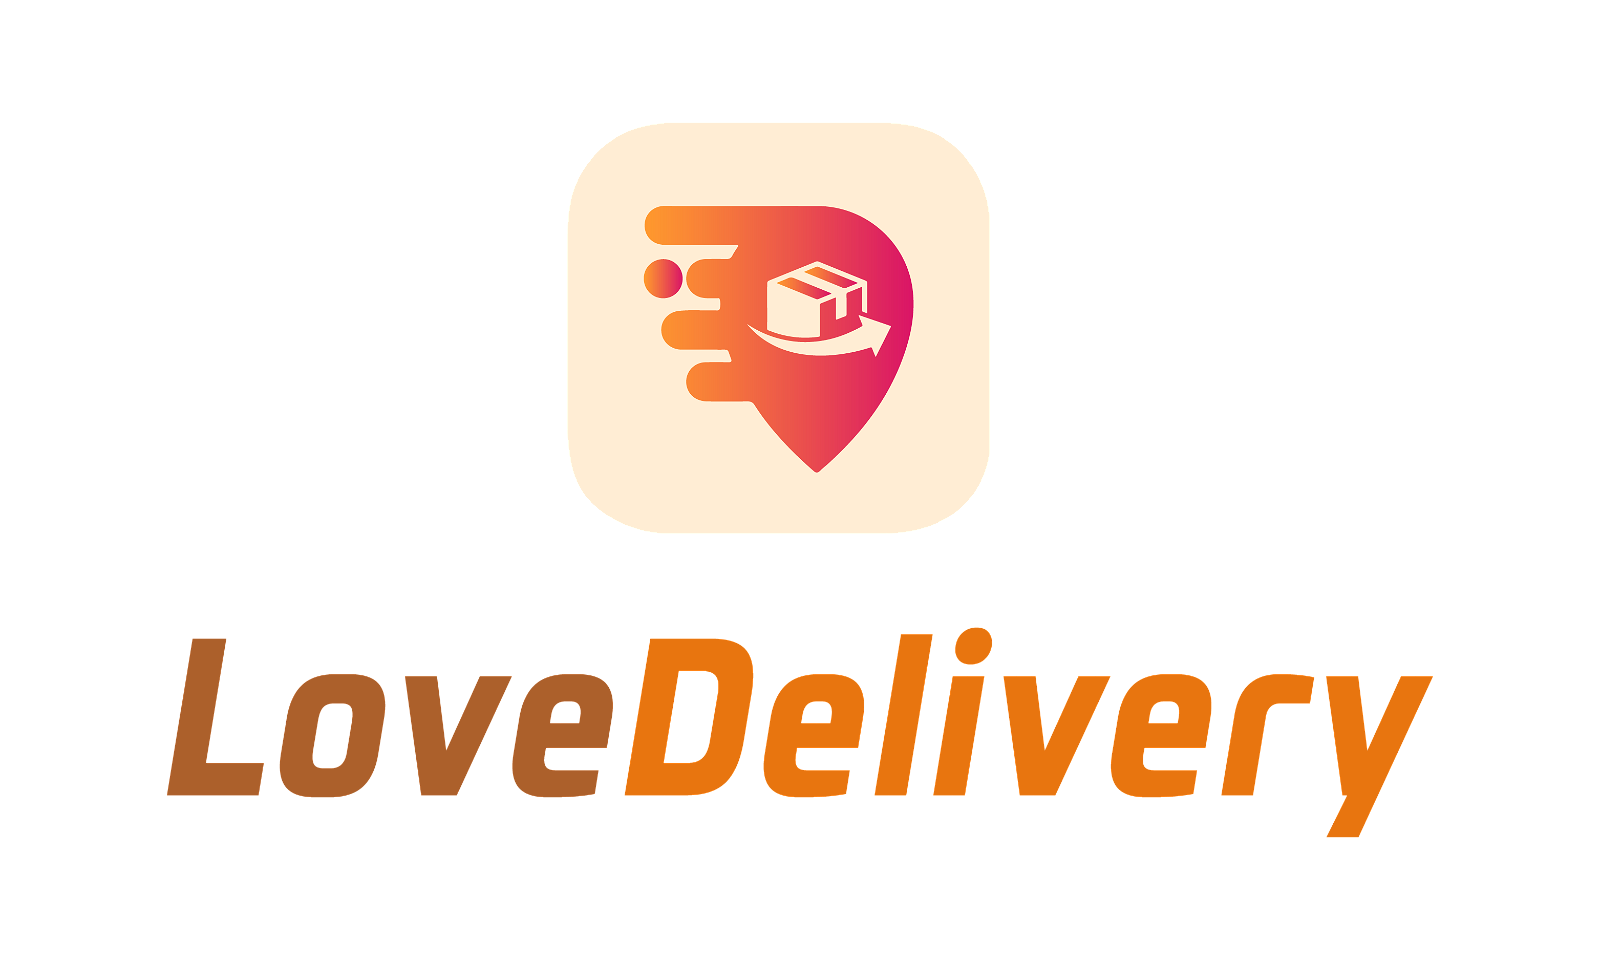 LoveDelivery.com - Creative brandable domain for sale